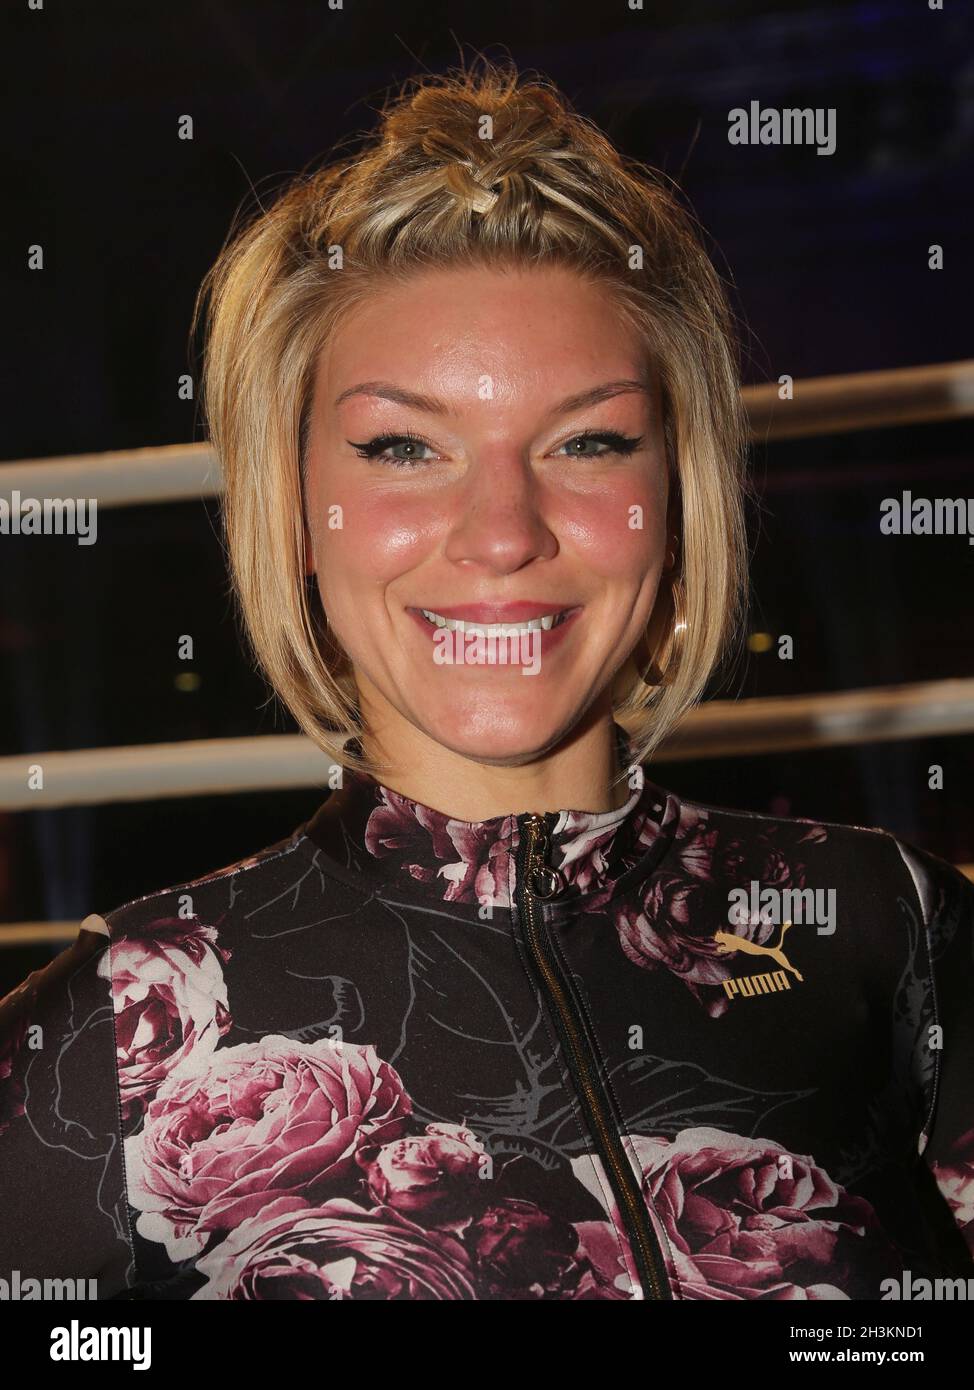 German Featherweight Boxer Nina Meinke At The SES Boxing Gala On October 9th, 2021 In Magdeburg Stock Photo